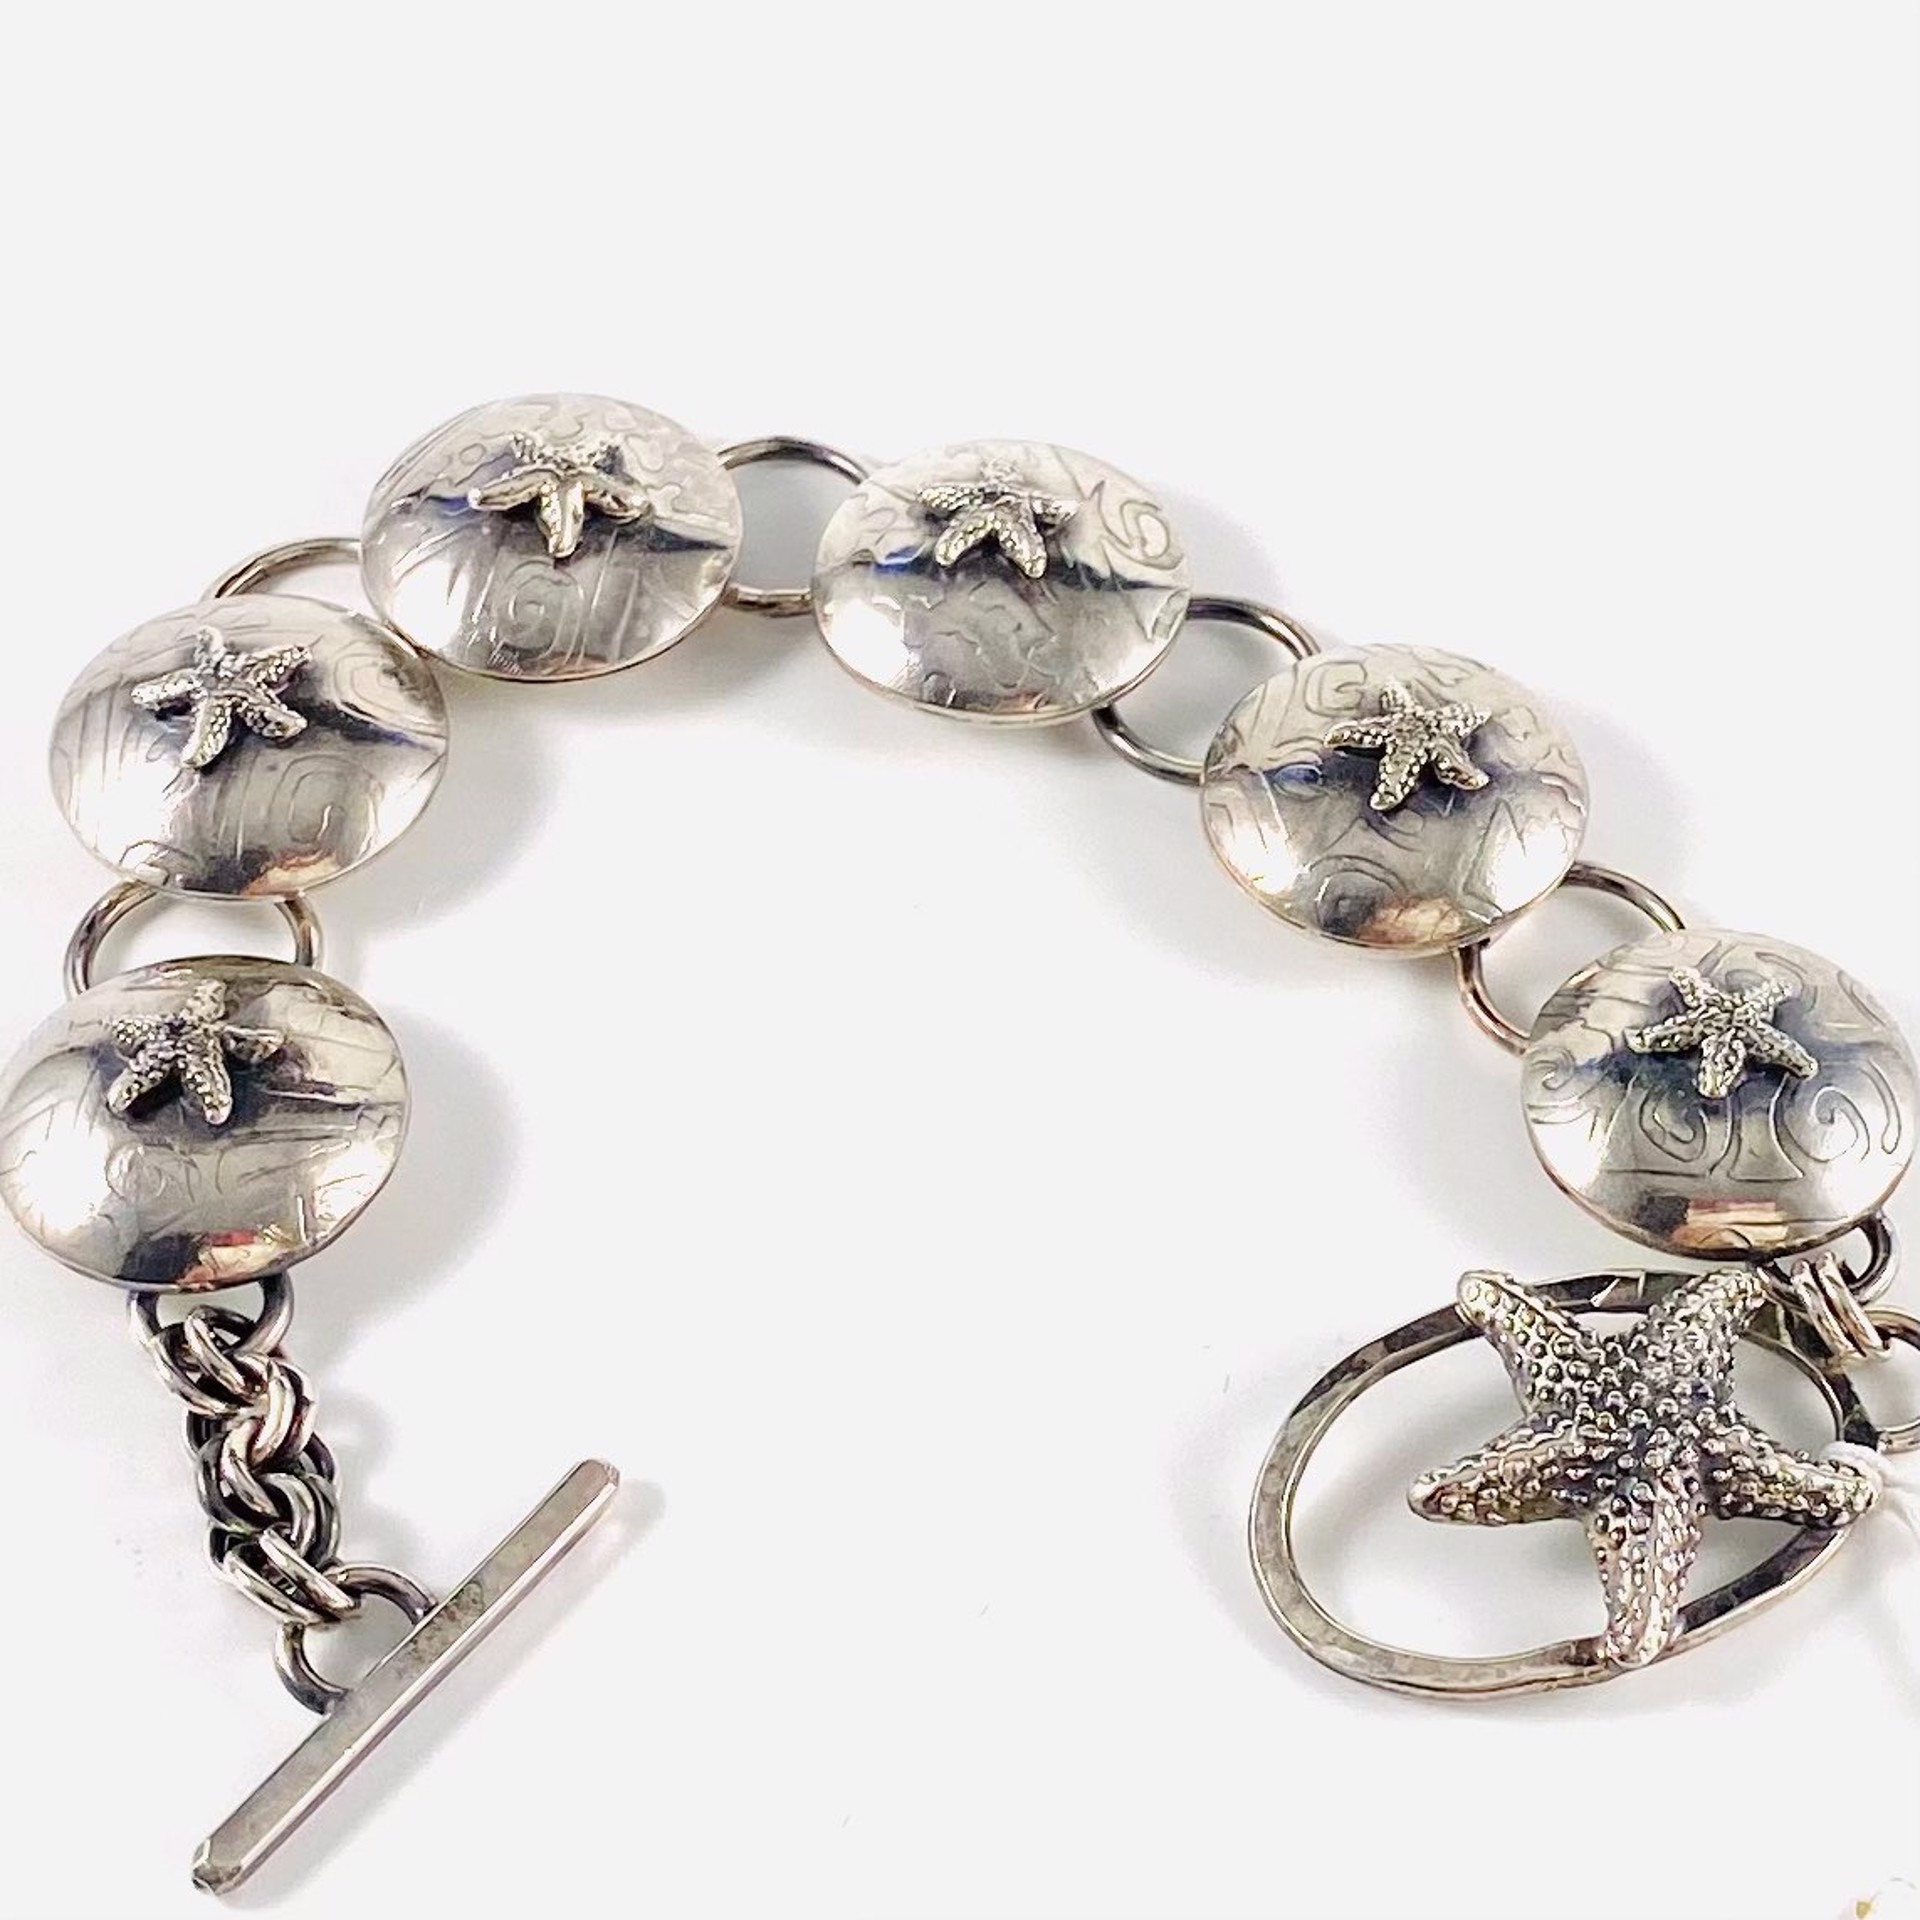 Six Disc with Starfish Accent and Large Starfish on Clasp, Link Bracelet AB22-77 by Anne Bivens